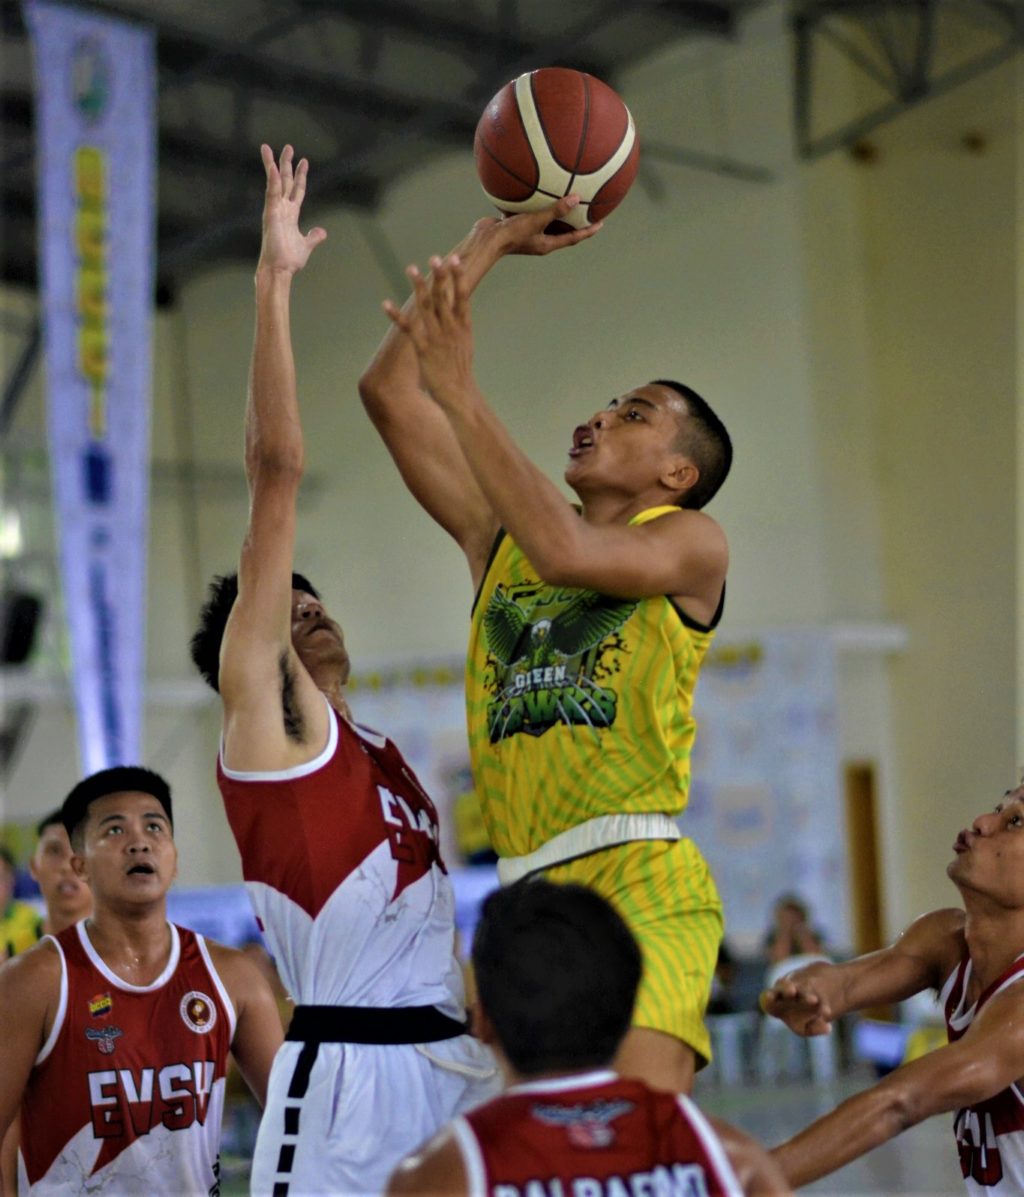 Mark Lester Montanes of St. Joseph College of Maasin breaks through the defense of EVSU to make his shot in the college division of the OCCCI D-League over the weekend. | Photo from OCCCI D-LeagueCEBU CITY, Philippines —The Saint Joseph College of Maasin Green Hawks and Baybay Senior High School put on dominating performances over the weekend in the OCCCI D-League Inter School Basketball Tournament South of Leyte Division at the Franciscan College of the Immaculate Conception (FCIC) gym in Baybay City, Leyte. The Green Hawks and Baybay SHS finished the first three days of the tournament with a clean 3-0 (win-loss) record after beating all their opponents in their scheduled matches. The Green Hawks opened their campaign with a lopsided win against the FCIC Heralds, 105-55, and went on to narrowly beat the Sto. Nino College of Ormoc, 69-66. They wrapped up the first weekend of competition with a win against the Eastern Visayas State University, 70-62. Trailing behind them in the team standings is the Western Leyte College with a 2-0 record, followed by Sto. Nino College of Ormoc (1-2), and EVSU (1-2). Meanwhile, Baybay SHS started their campaign with a blistering start after beating Baybay Fisheries High School, 63-43, in the high school division Bracket A. They also beat Saint Joseph's College of Maasin, 59-51, and escaped FCIC Heralds of Baybay, 94-92, in their final game. In Bracket B, Baybay National High School and St. Joseph's College of Maasin are tied with a 2-1 record. On the other hand, Libas Elementary School and Baybay 1 District Central School each scored a win in the elementary division. The hardcourt action will resume this weekend at the same venue. Mark Lester Montanes of St. Joseph College of Maasin breaks through the defense of EVSU to make his shot in the college division of the OCCCI D-League over the weekend. | Photo from OCCCI D-League